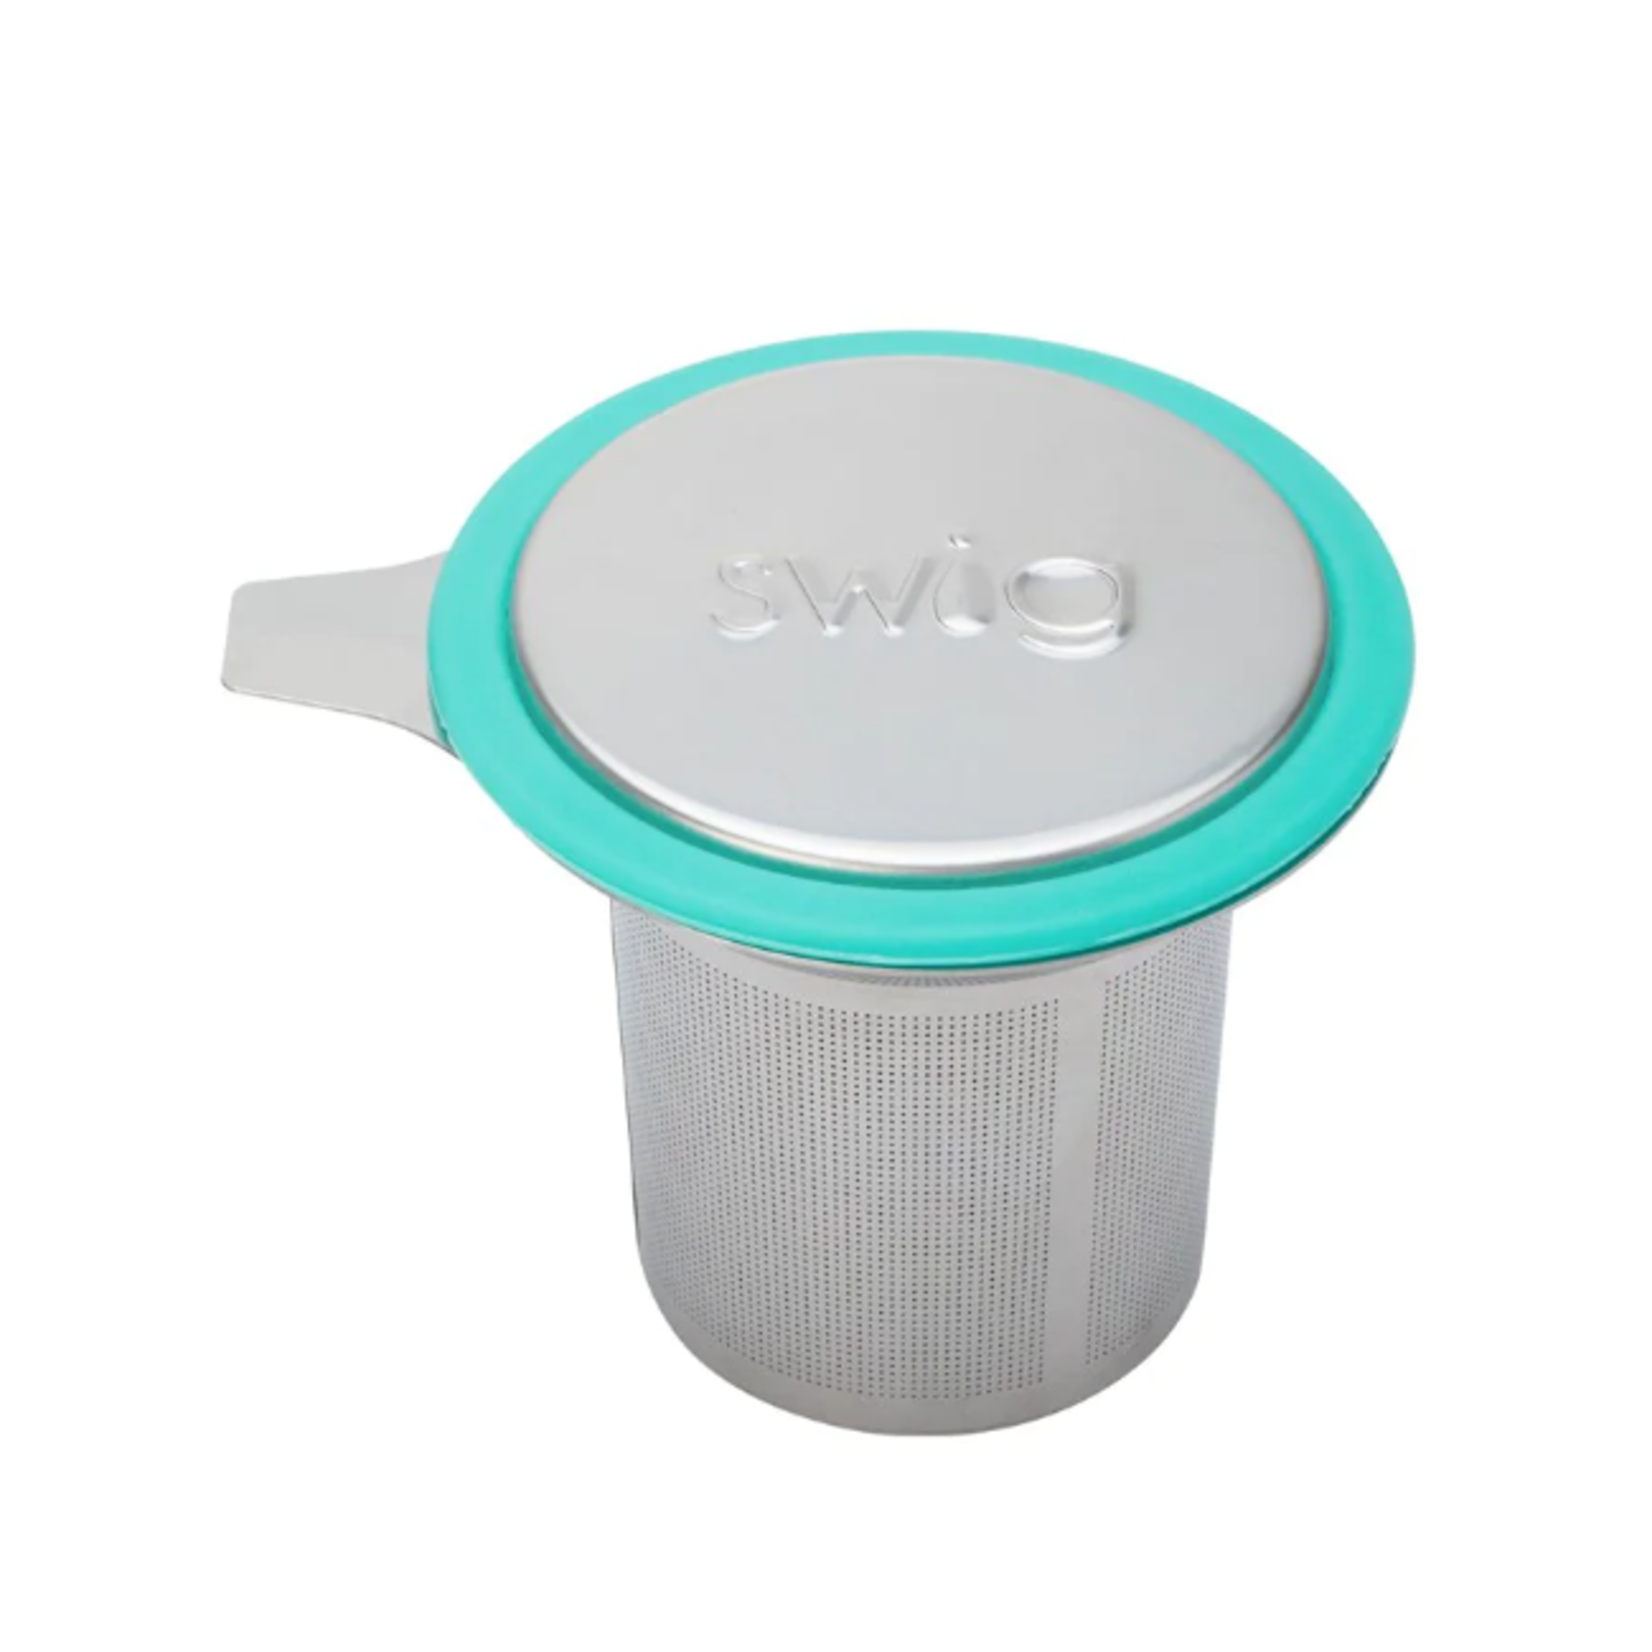 Swig Swig Tea Infuser Basket With Silicone Cover